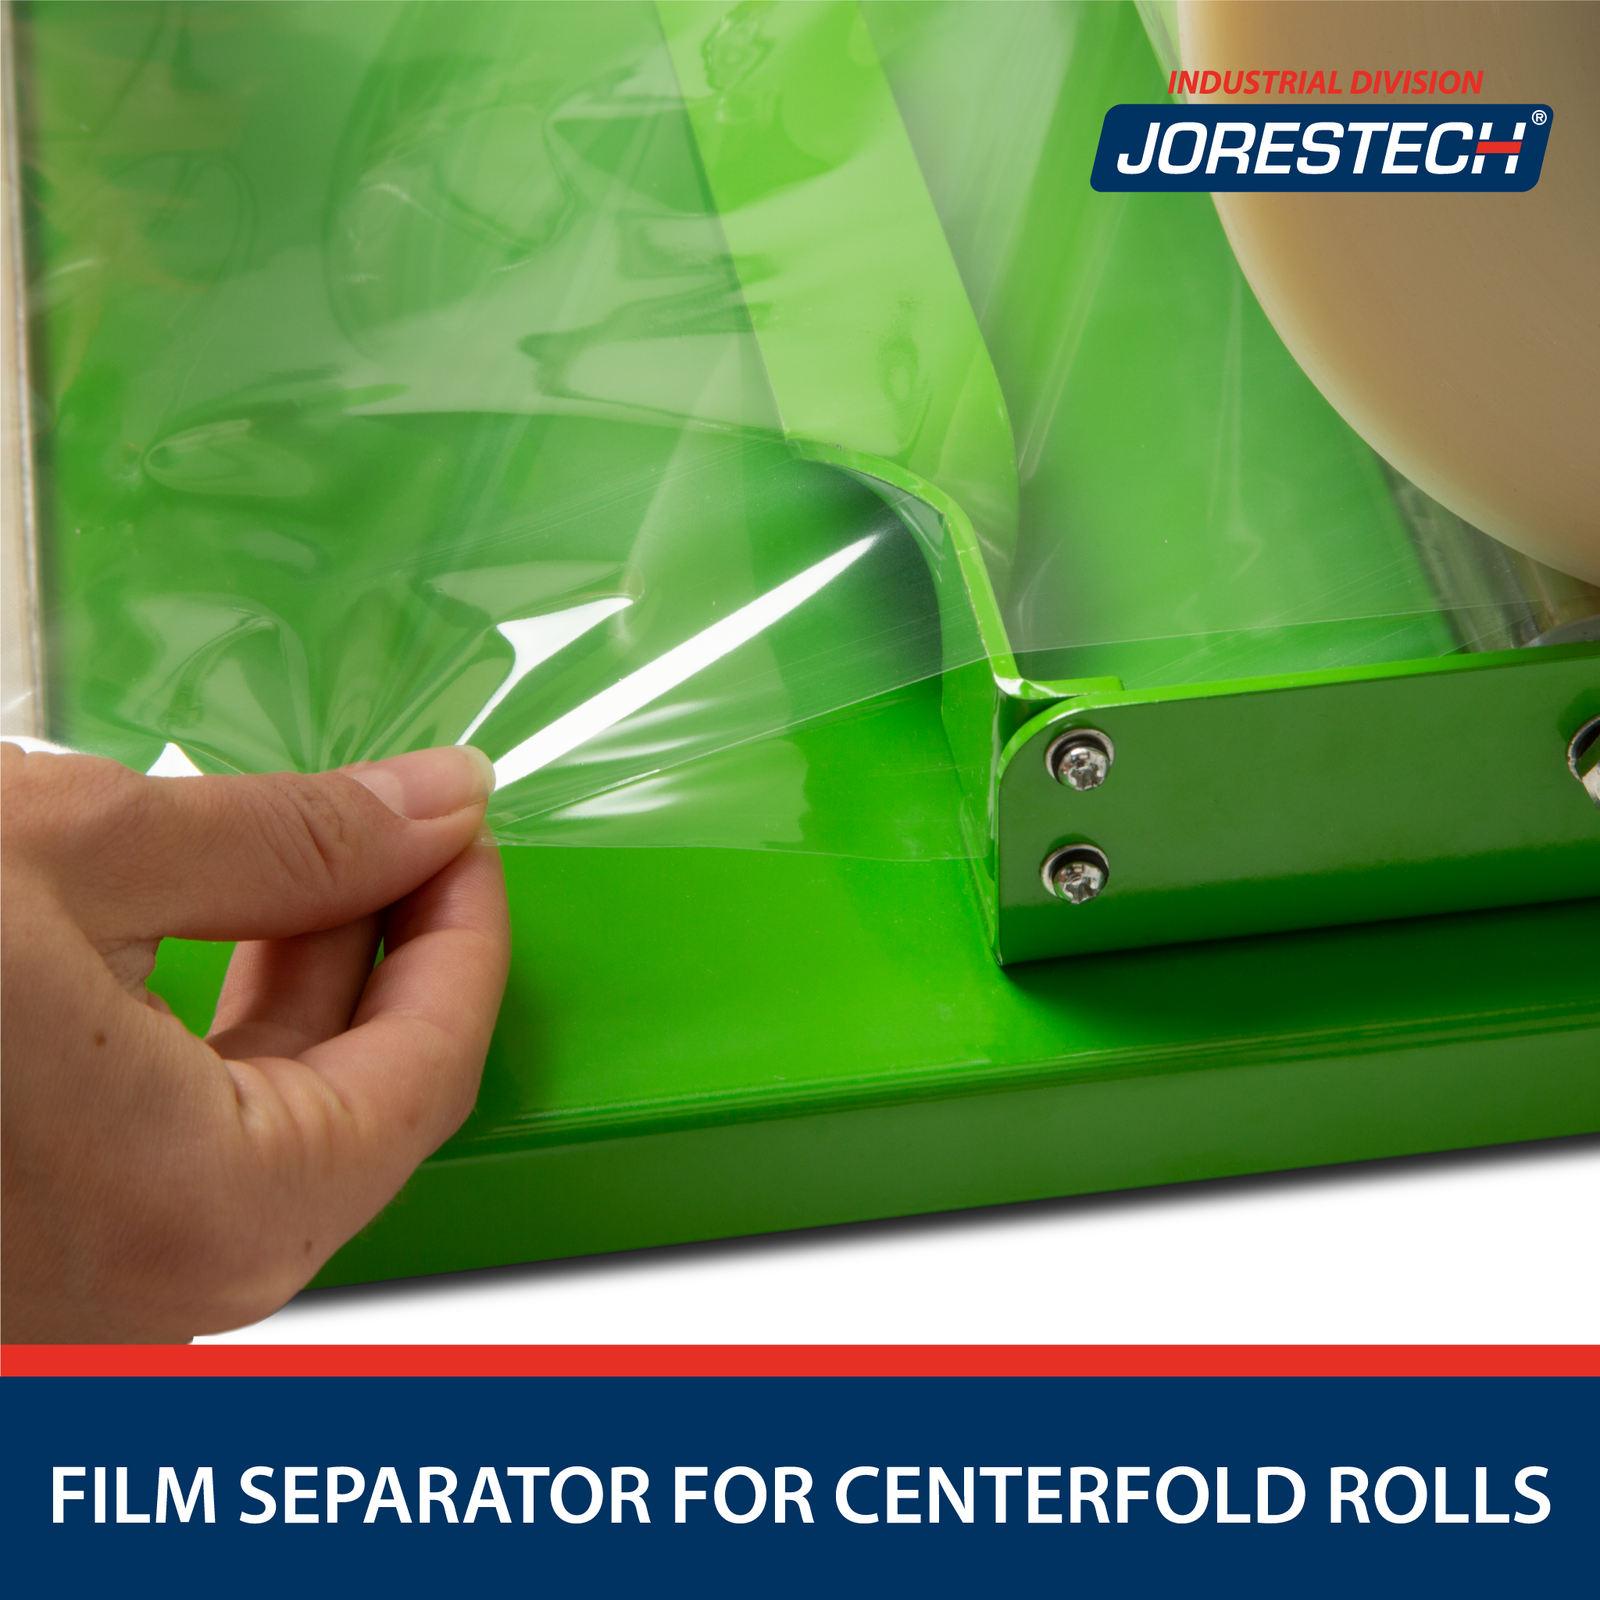 Hand pulling shrink film from a centerfold shrink roll. Shows how the film separating arm keeps both sides of the film neatly separated from each other for an easier packaging experience. Bottom text reads “Film Separator for Centerfold Rolls”. 